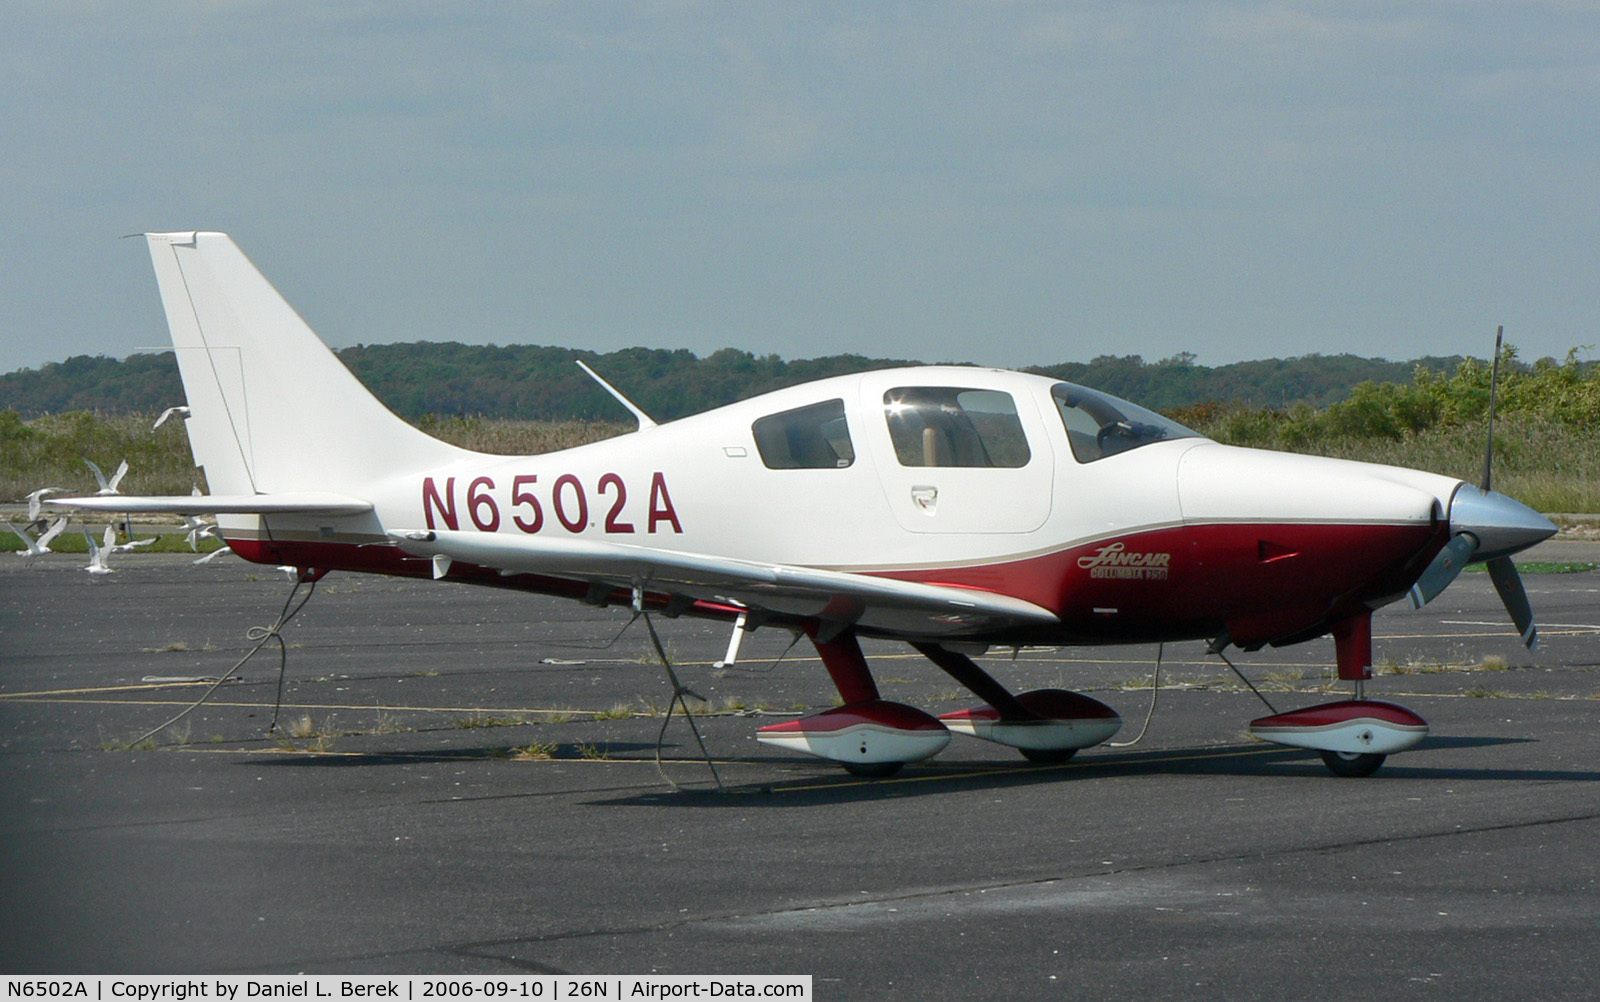 N6502A, 2004 Lancair LC42-550FG C/N 42048, A 2004 Lancair Columbia from Lancaster, PA, takes in the sea air at the Jersey shore.